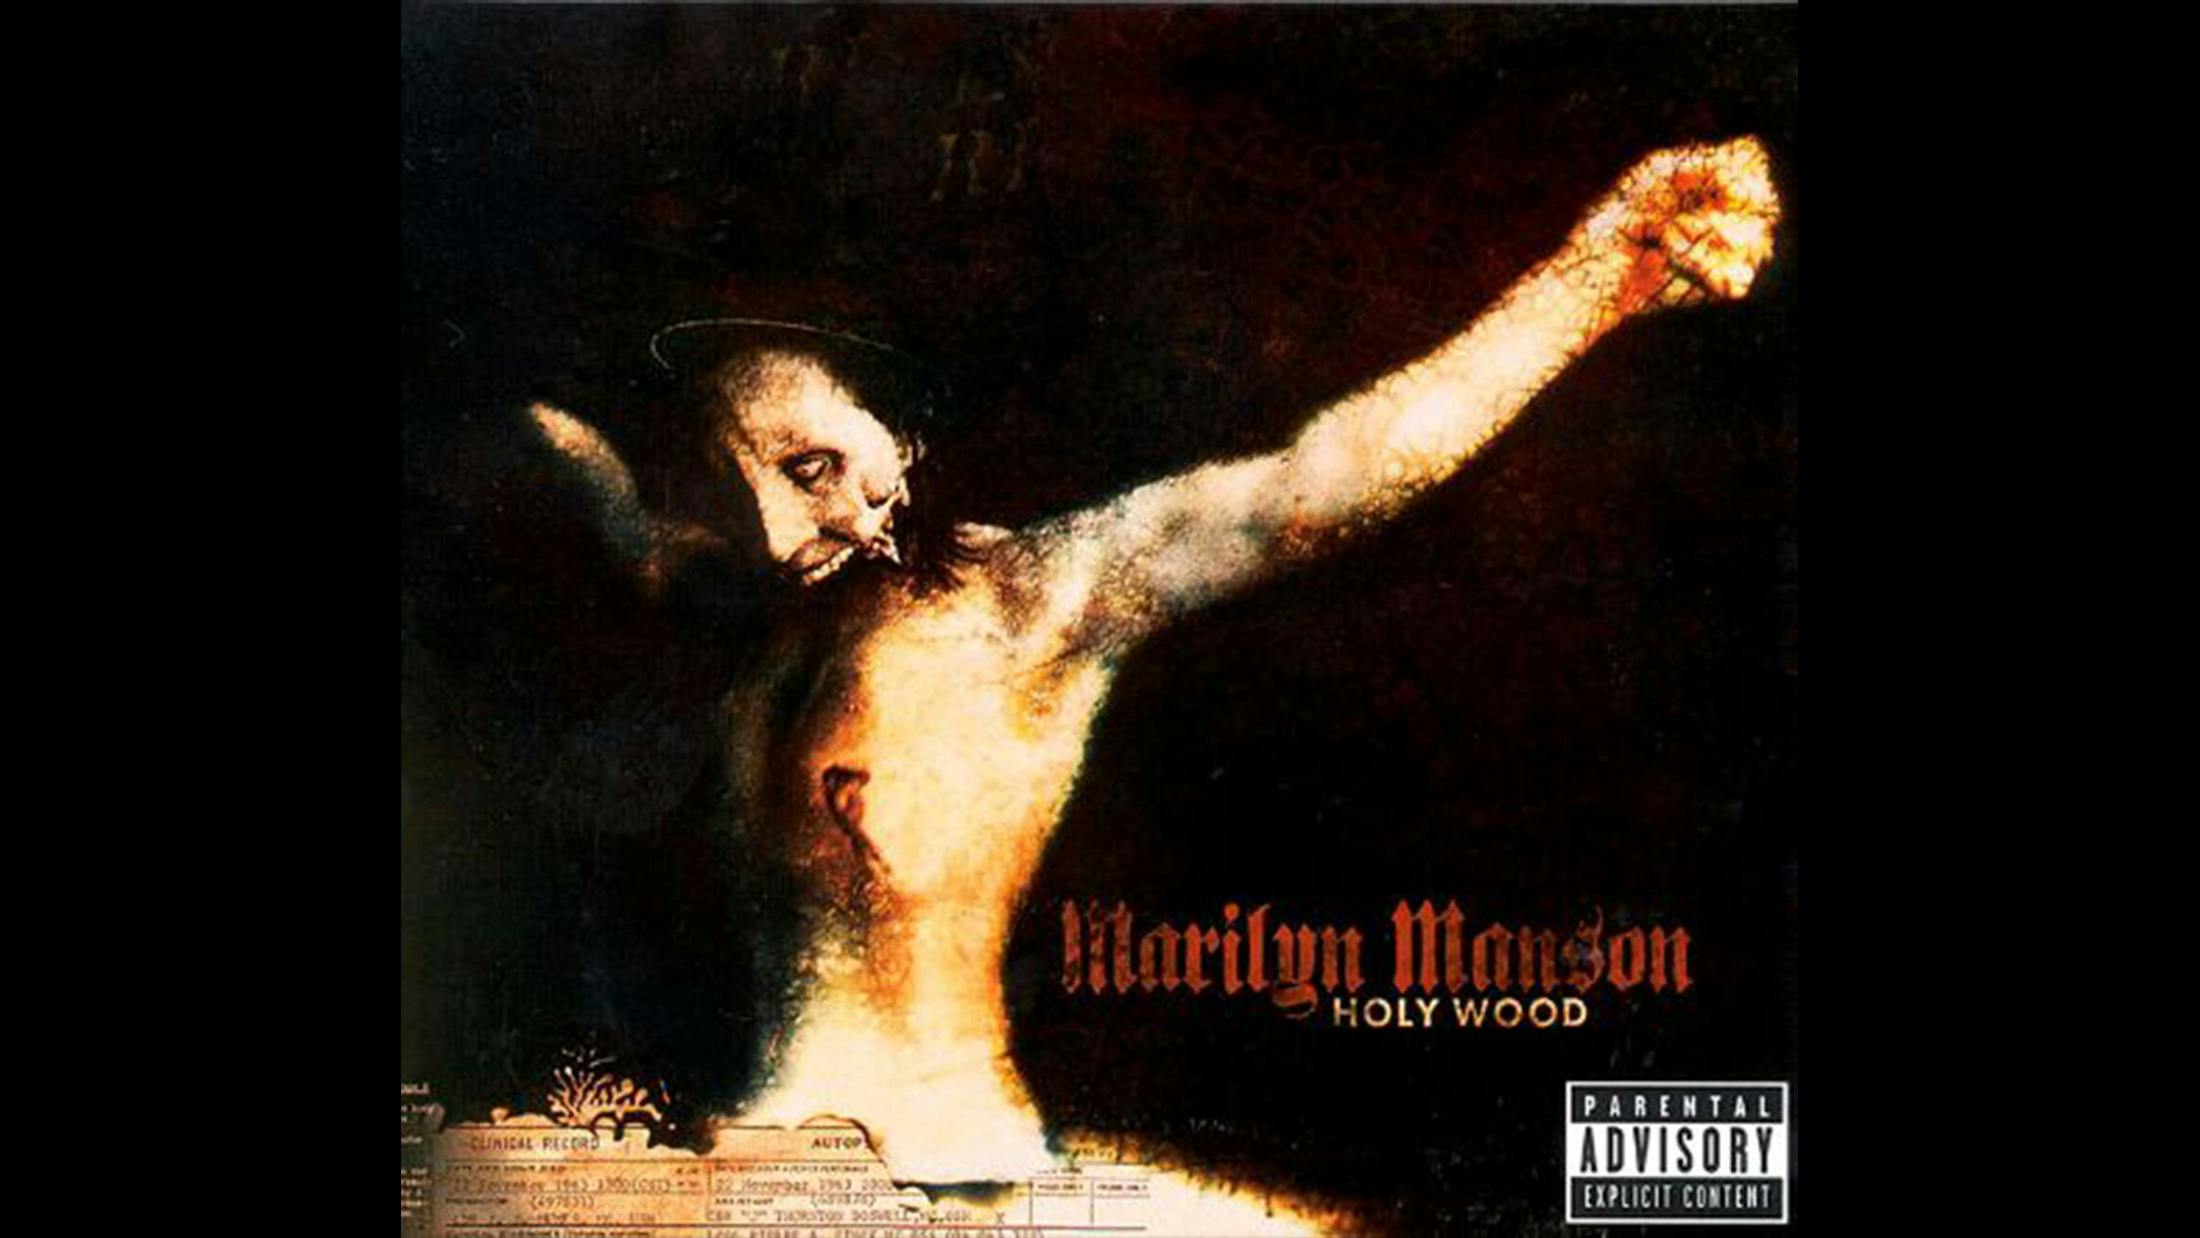 “I hate you for making me do this, but I’ll rank these albums on an emotional scale,” says Manson. “And this is the most important record, in my heart, maybe because it came straight after Columbine [the 1999 U.S. high school shooting, which sections of the media suggested Manson’s music had inspired]. It’s not my most personal or confessional record, but maybe in some ways it is because I was talking about all the things in my head.”